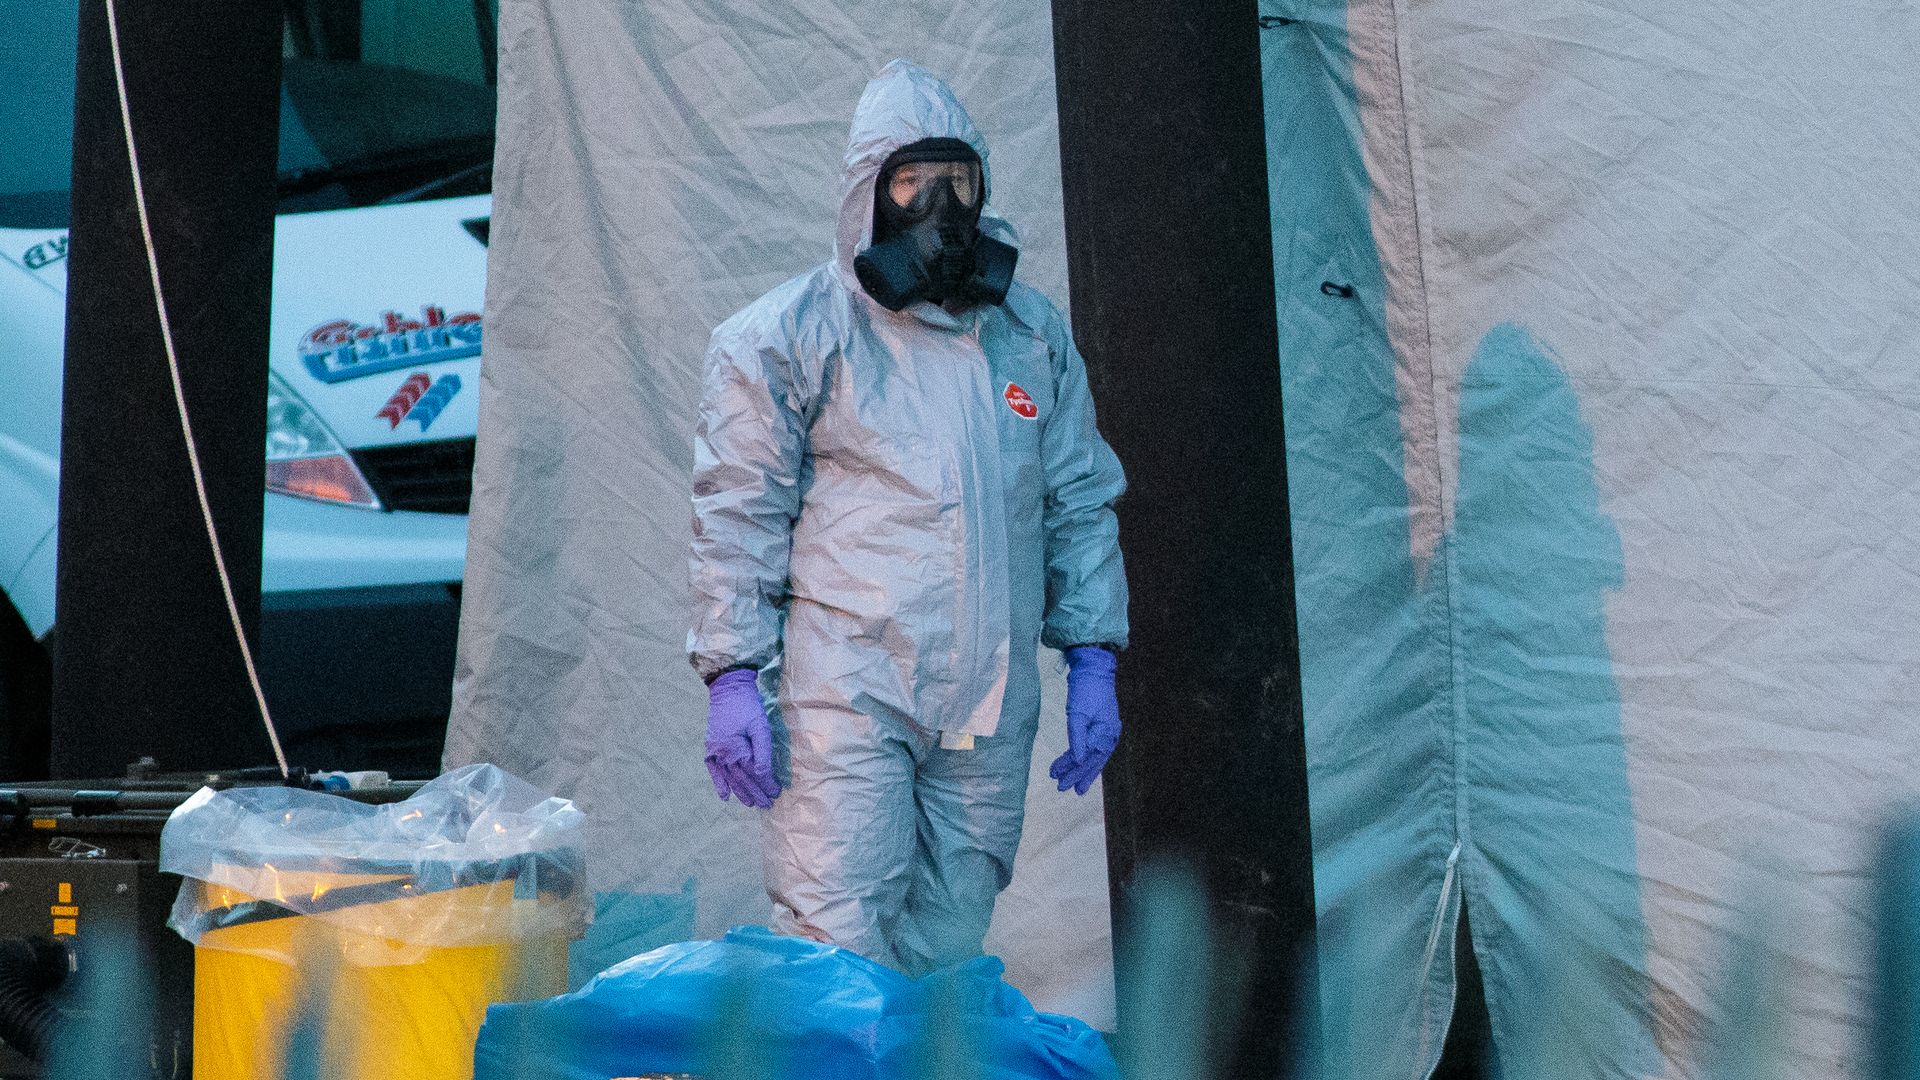  A police officer stands by a forensics tent as investigations continue into the poisoning of Sergei Skripal in March. Photo: Jack Taylor/Getty Images